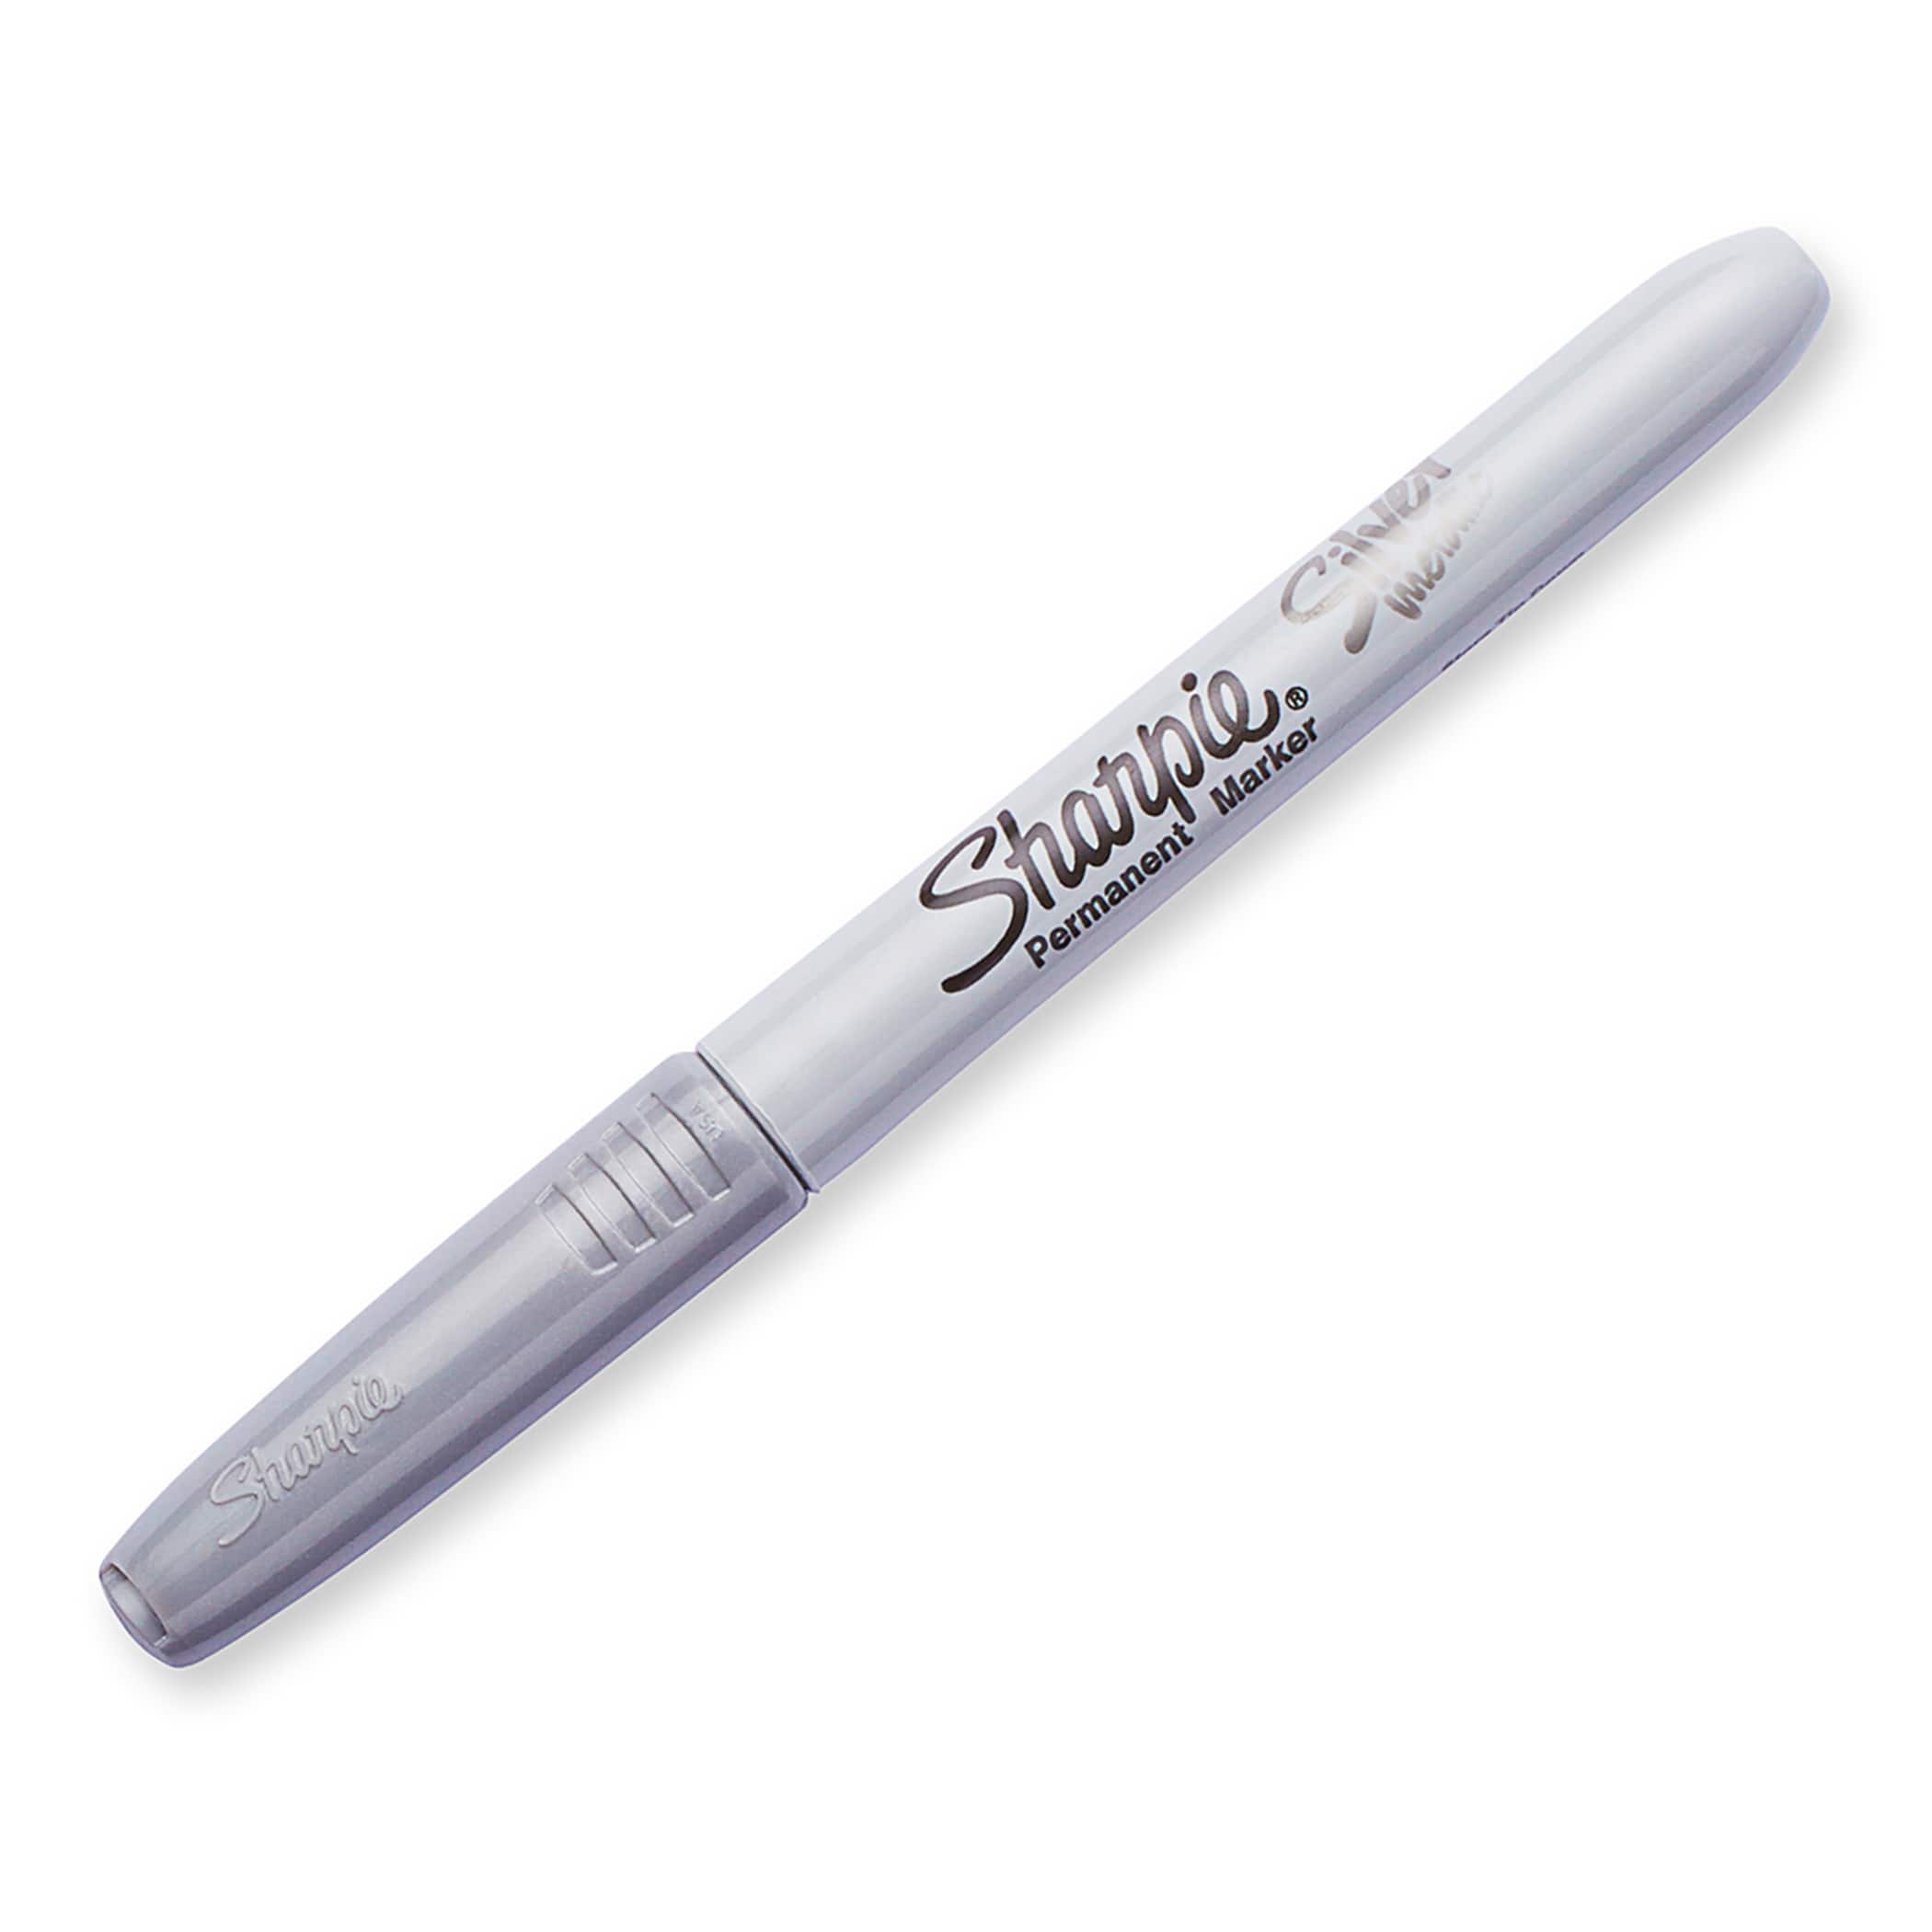 Sharpie Metallic Permanent Markers, Fine Point, Silver, 12 Pack